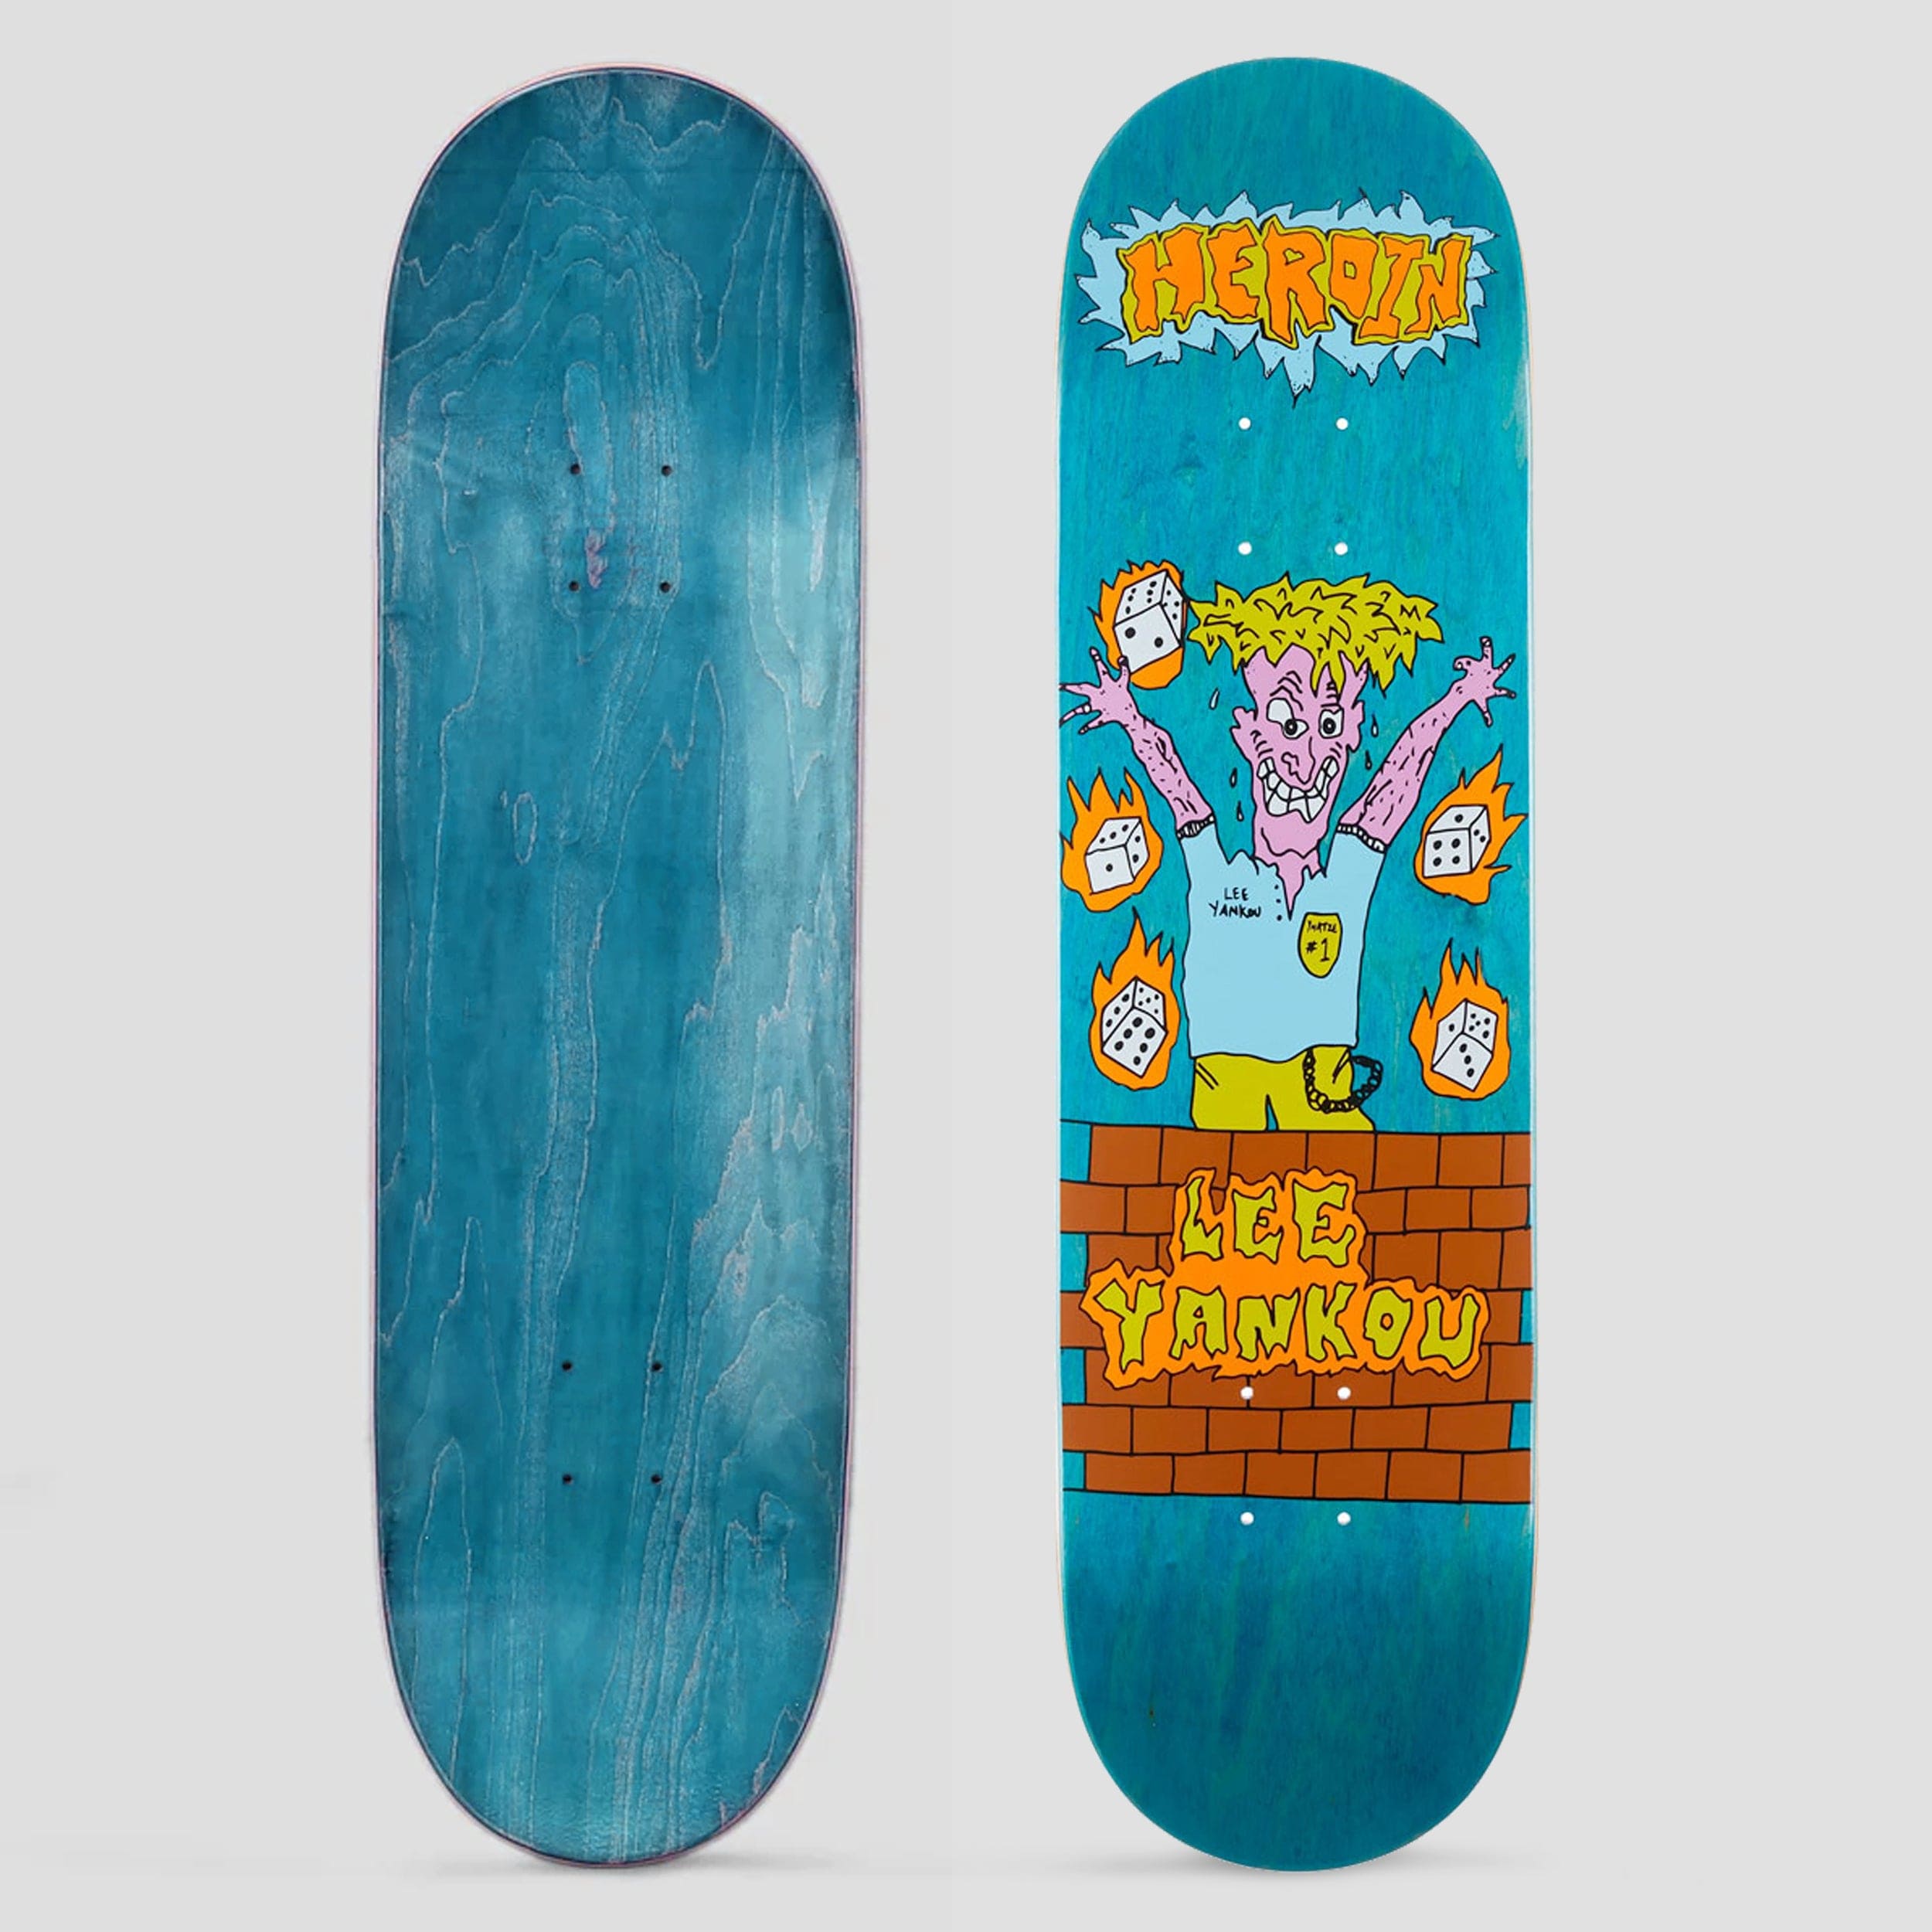 PALACE Skateboards Lucien Clarke Pro S28 skate deck 8.25 inches